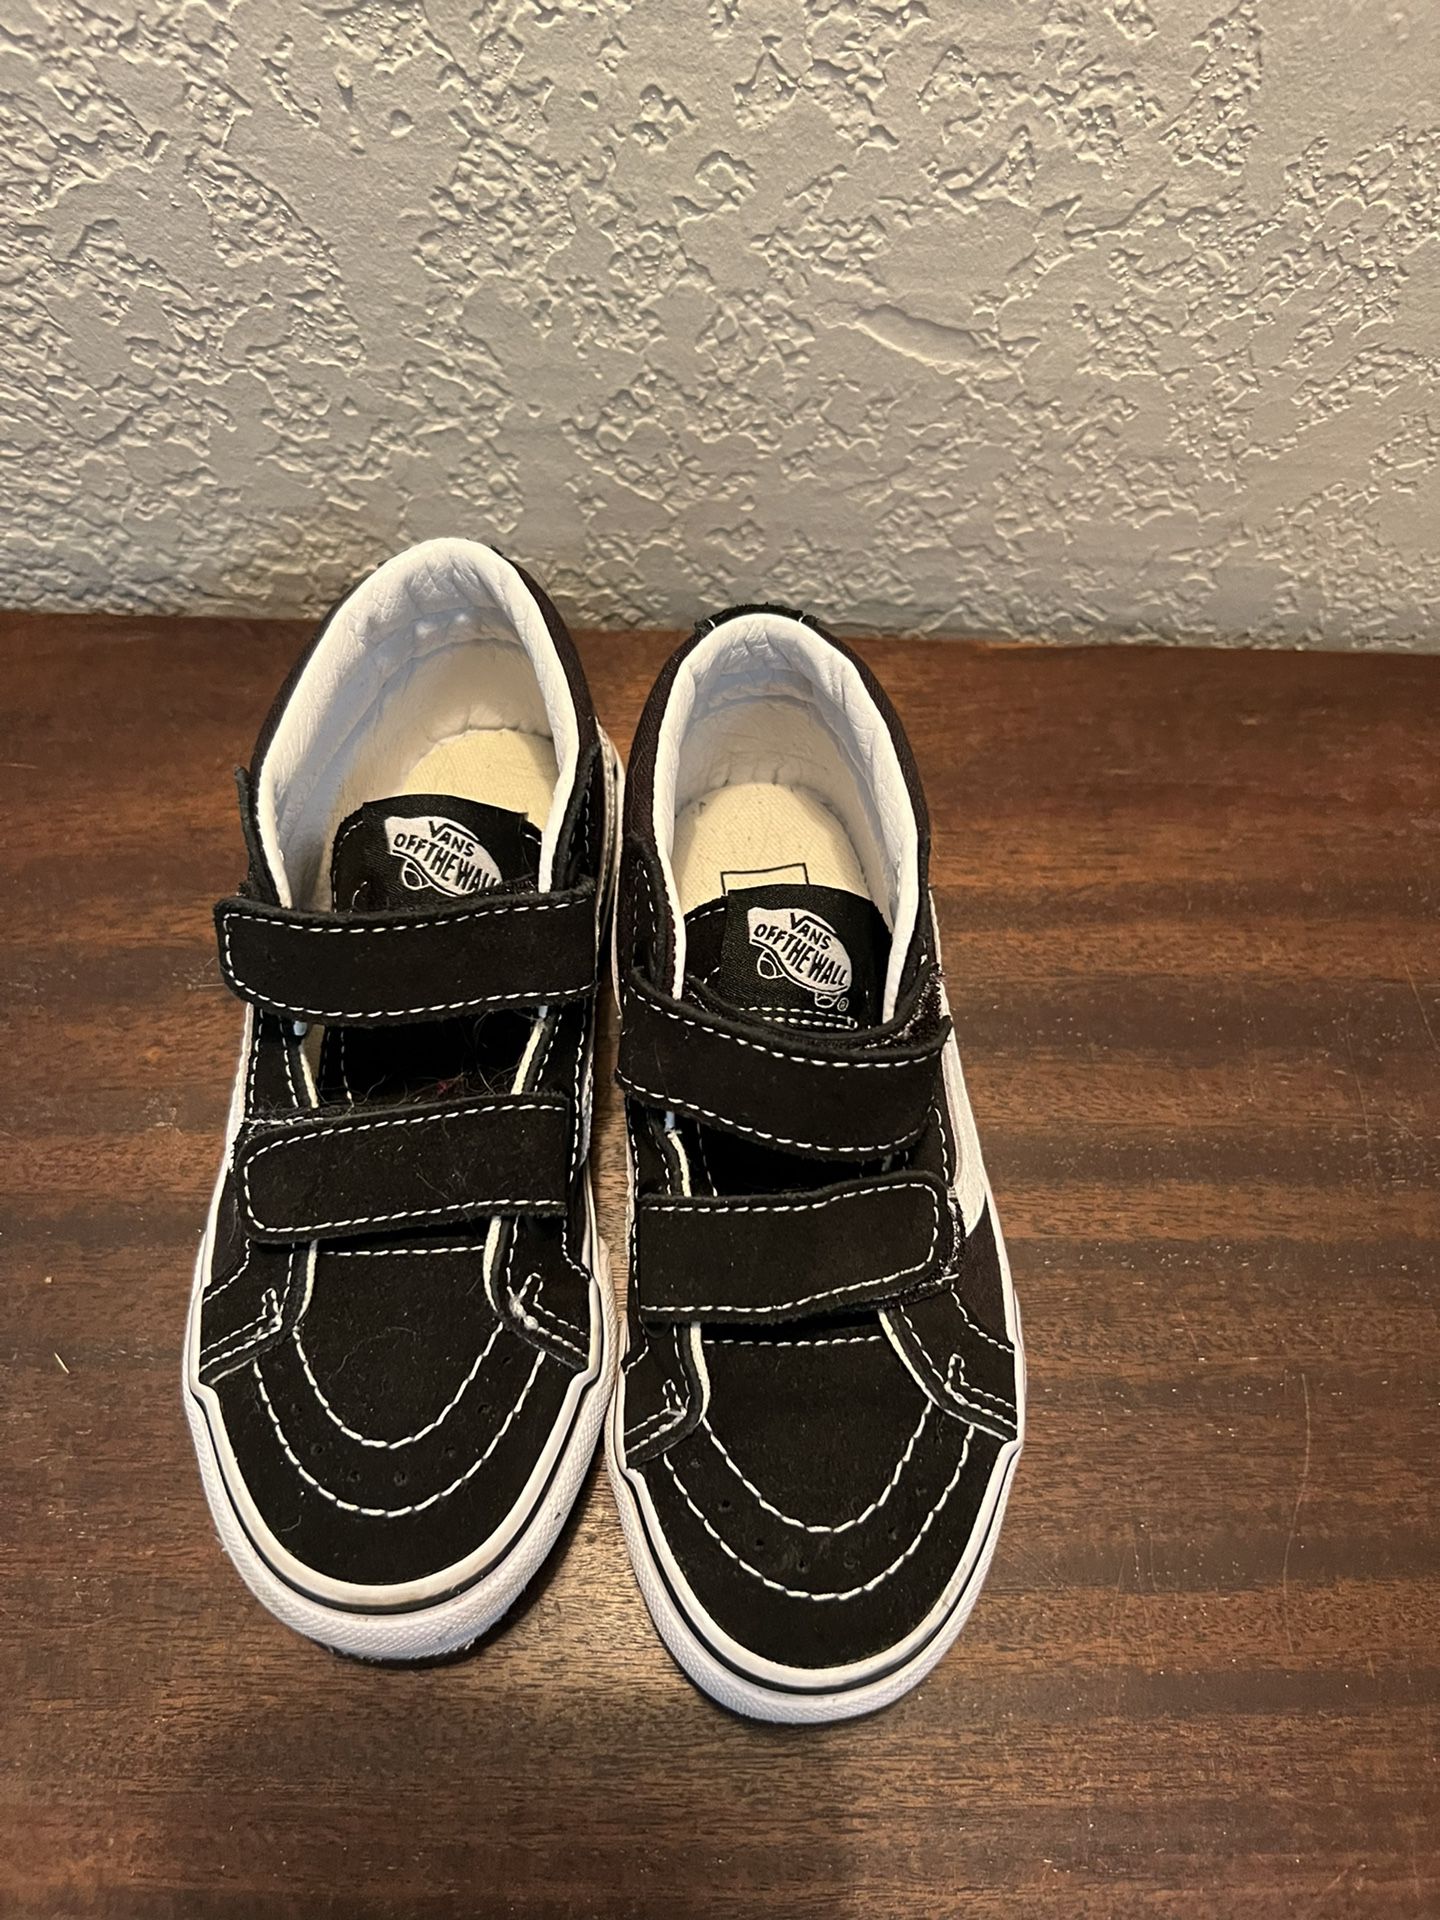 Vans Off The Wall Kids Size 12